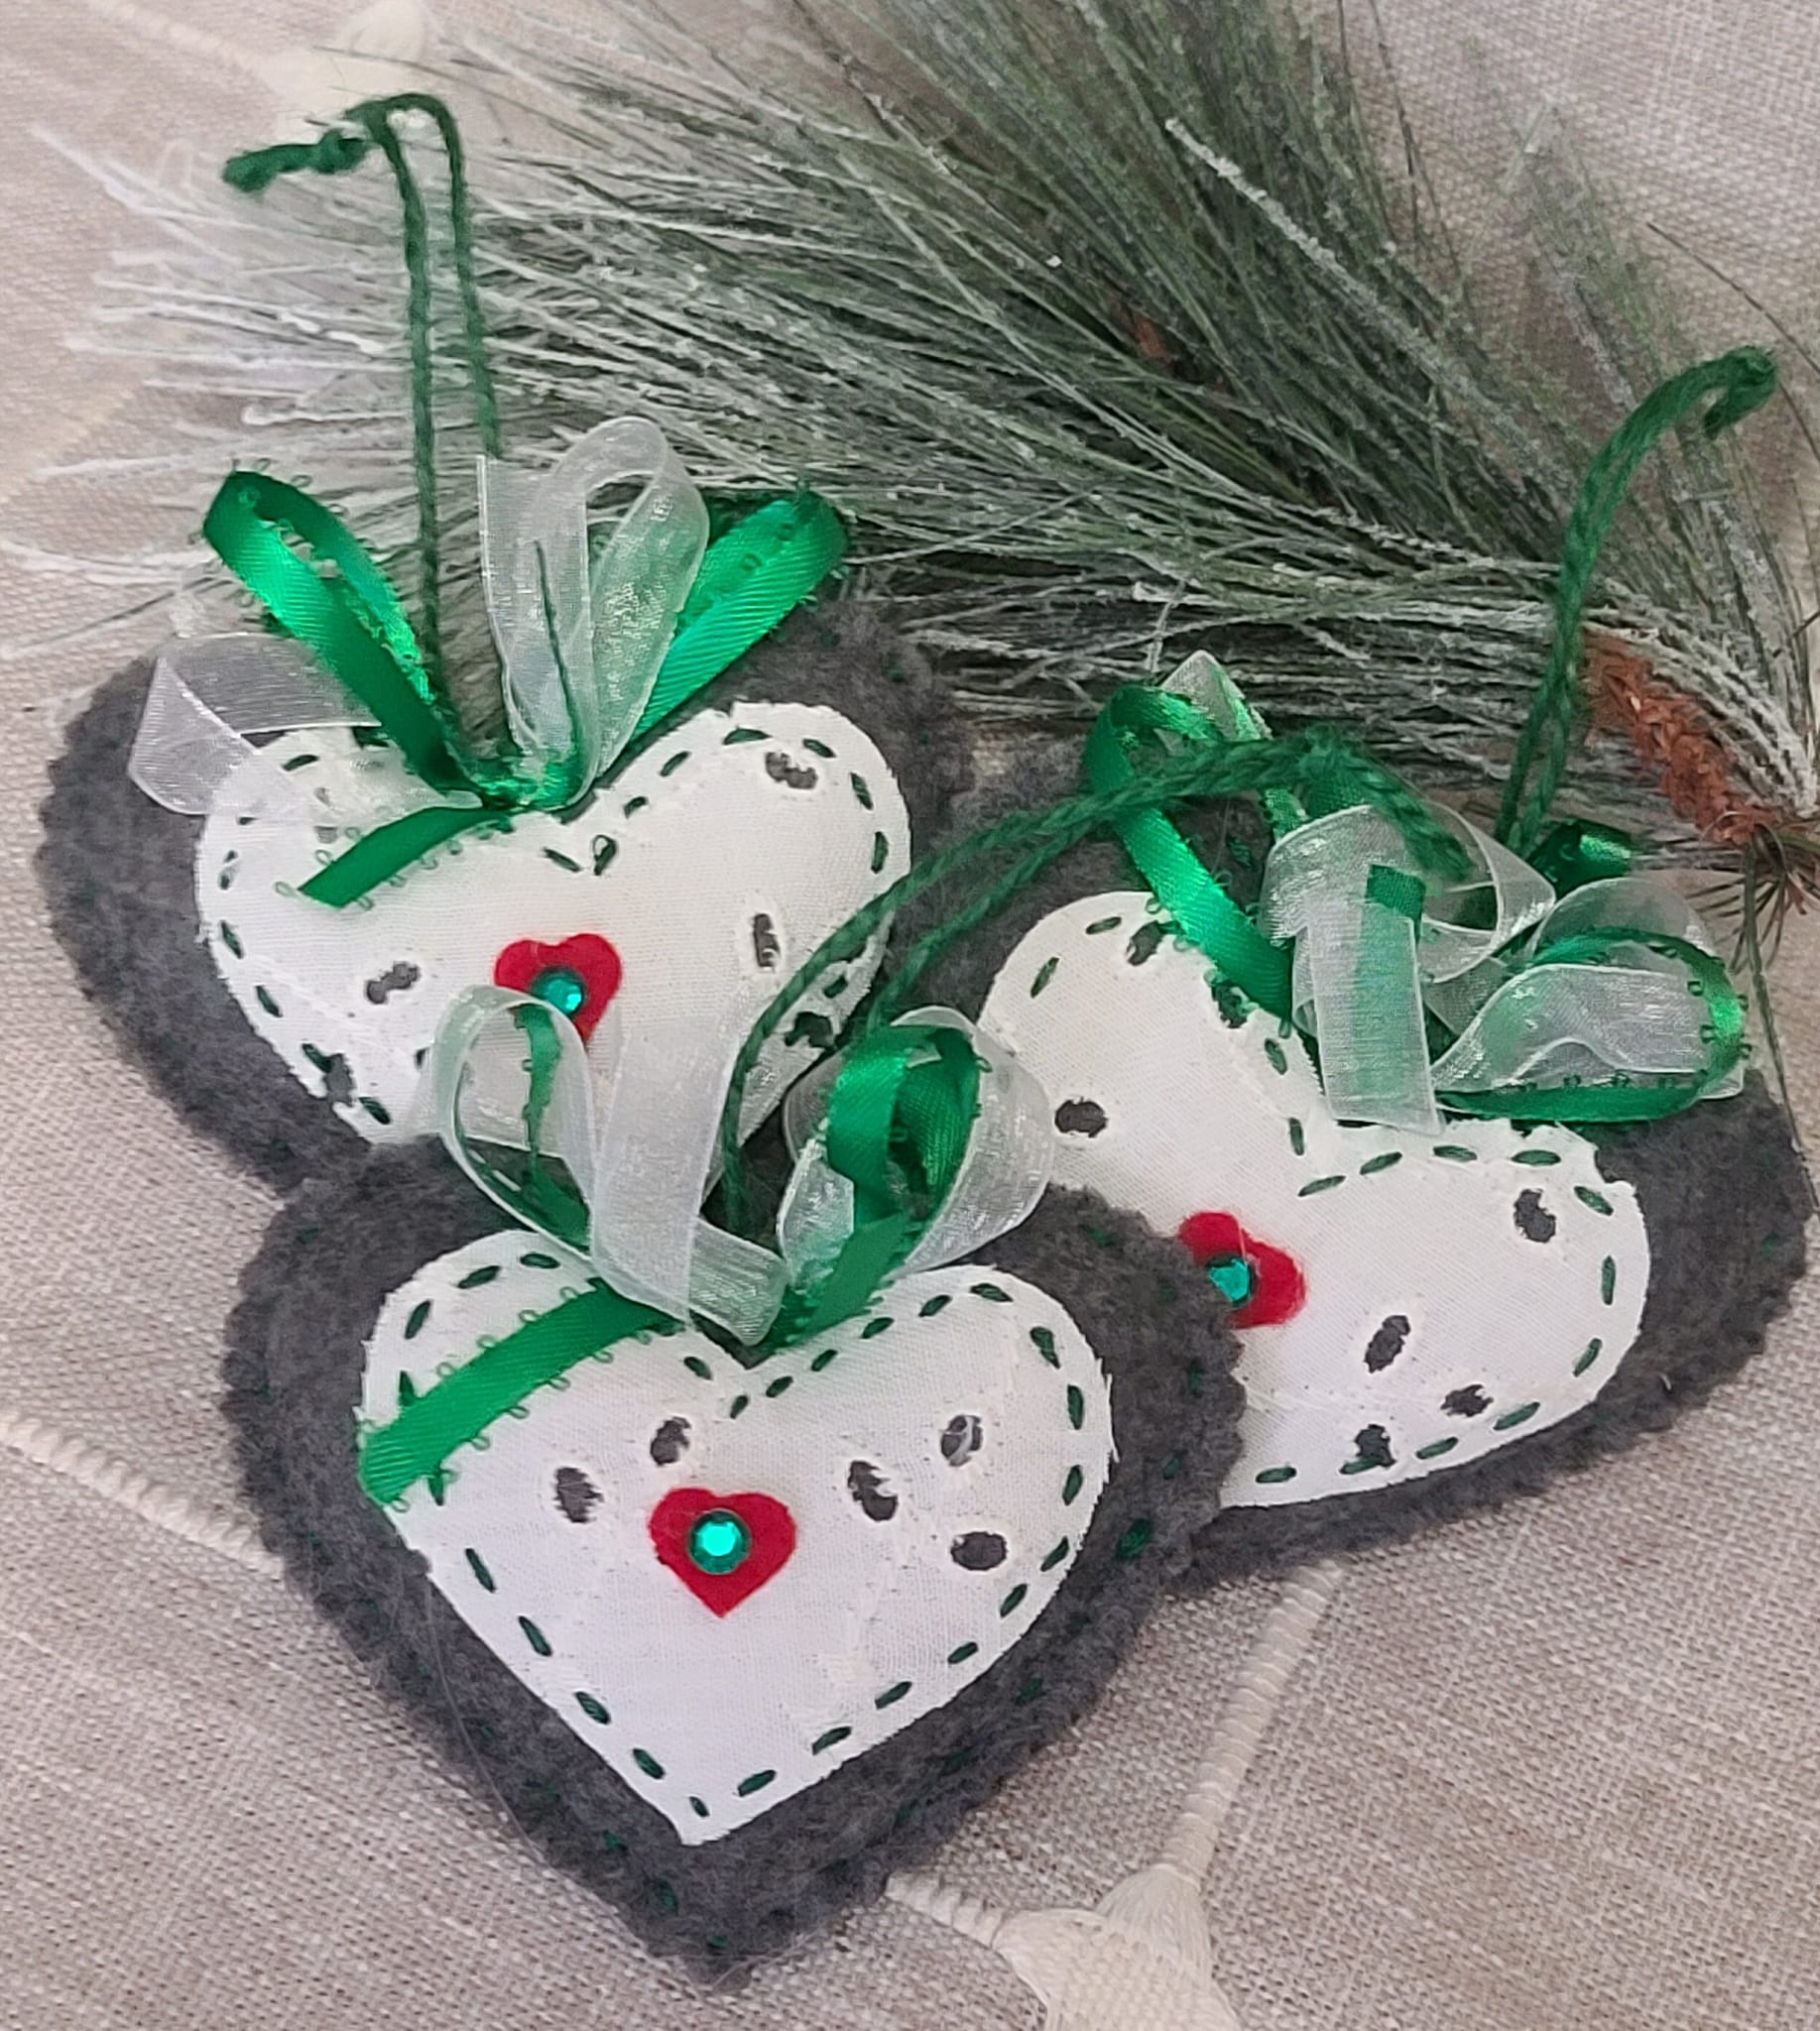 Lace and Gray Hearts Romantic stuffed Heart Ornaments set of 3